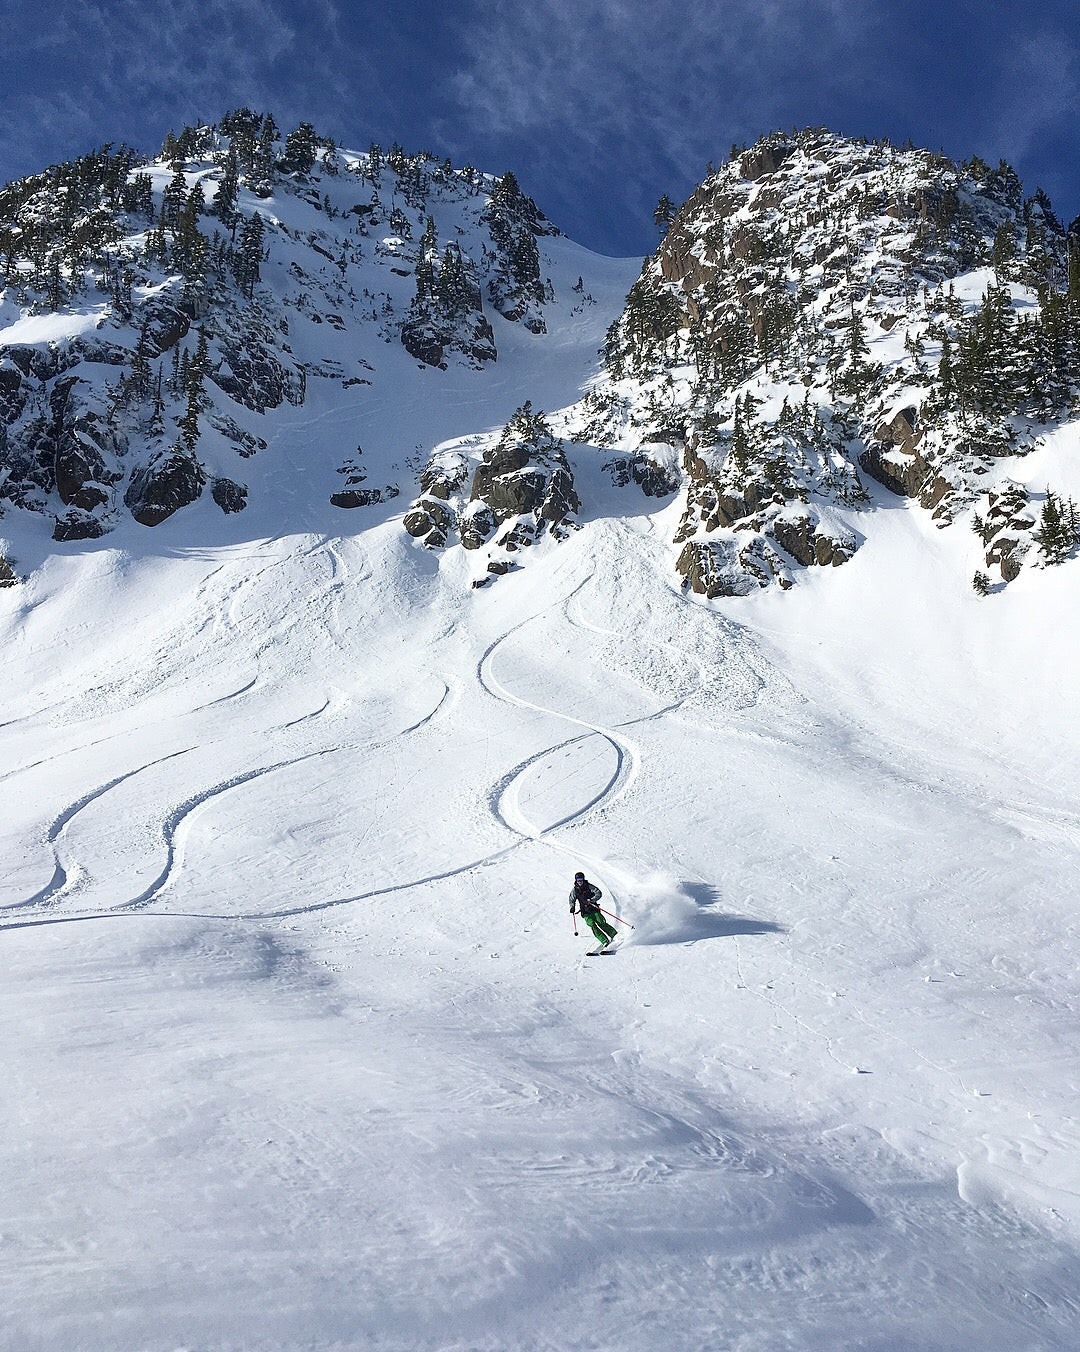 Skier coming out of a rocky chute making big open turns in powder. 